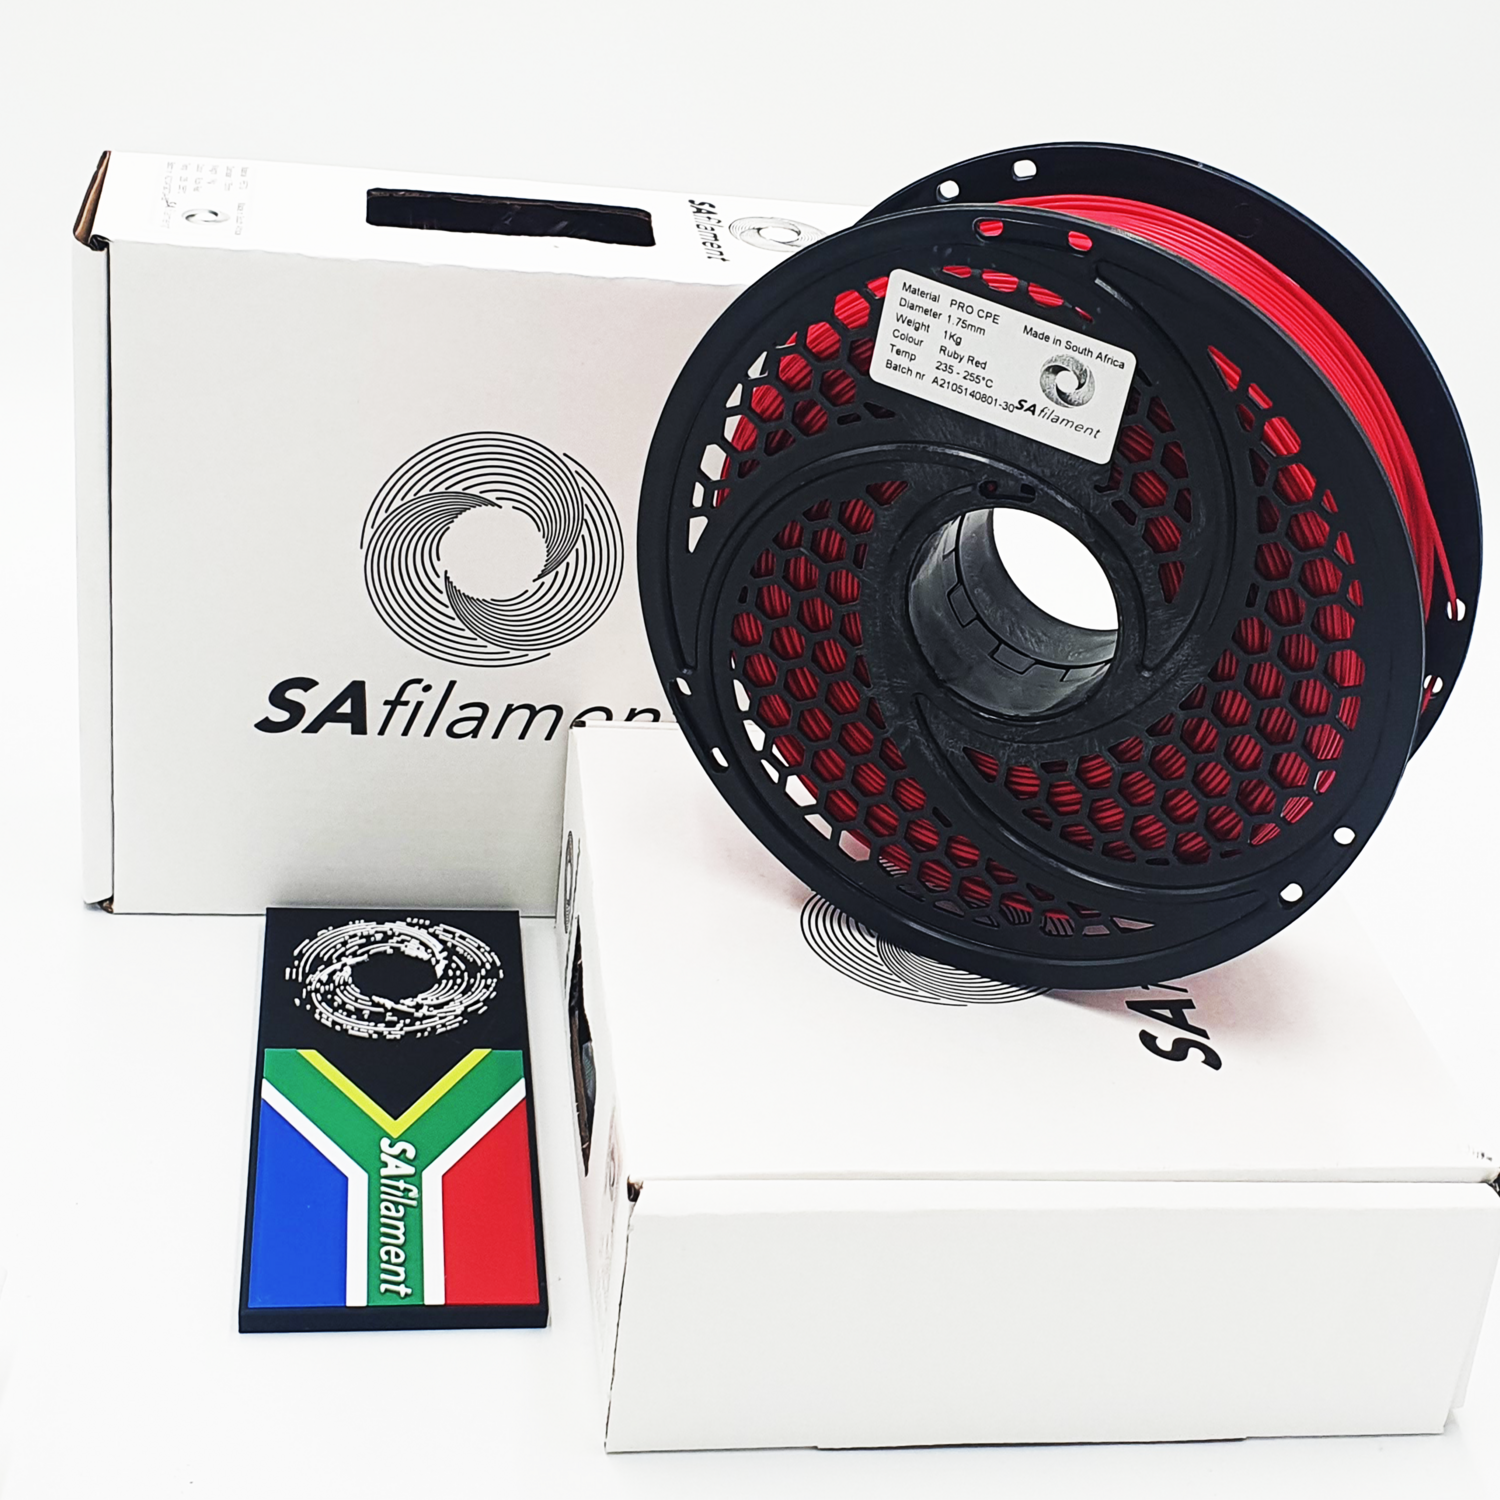 Red Pro CPE Filament, 1Kg, 1.75mm by SA Filament